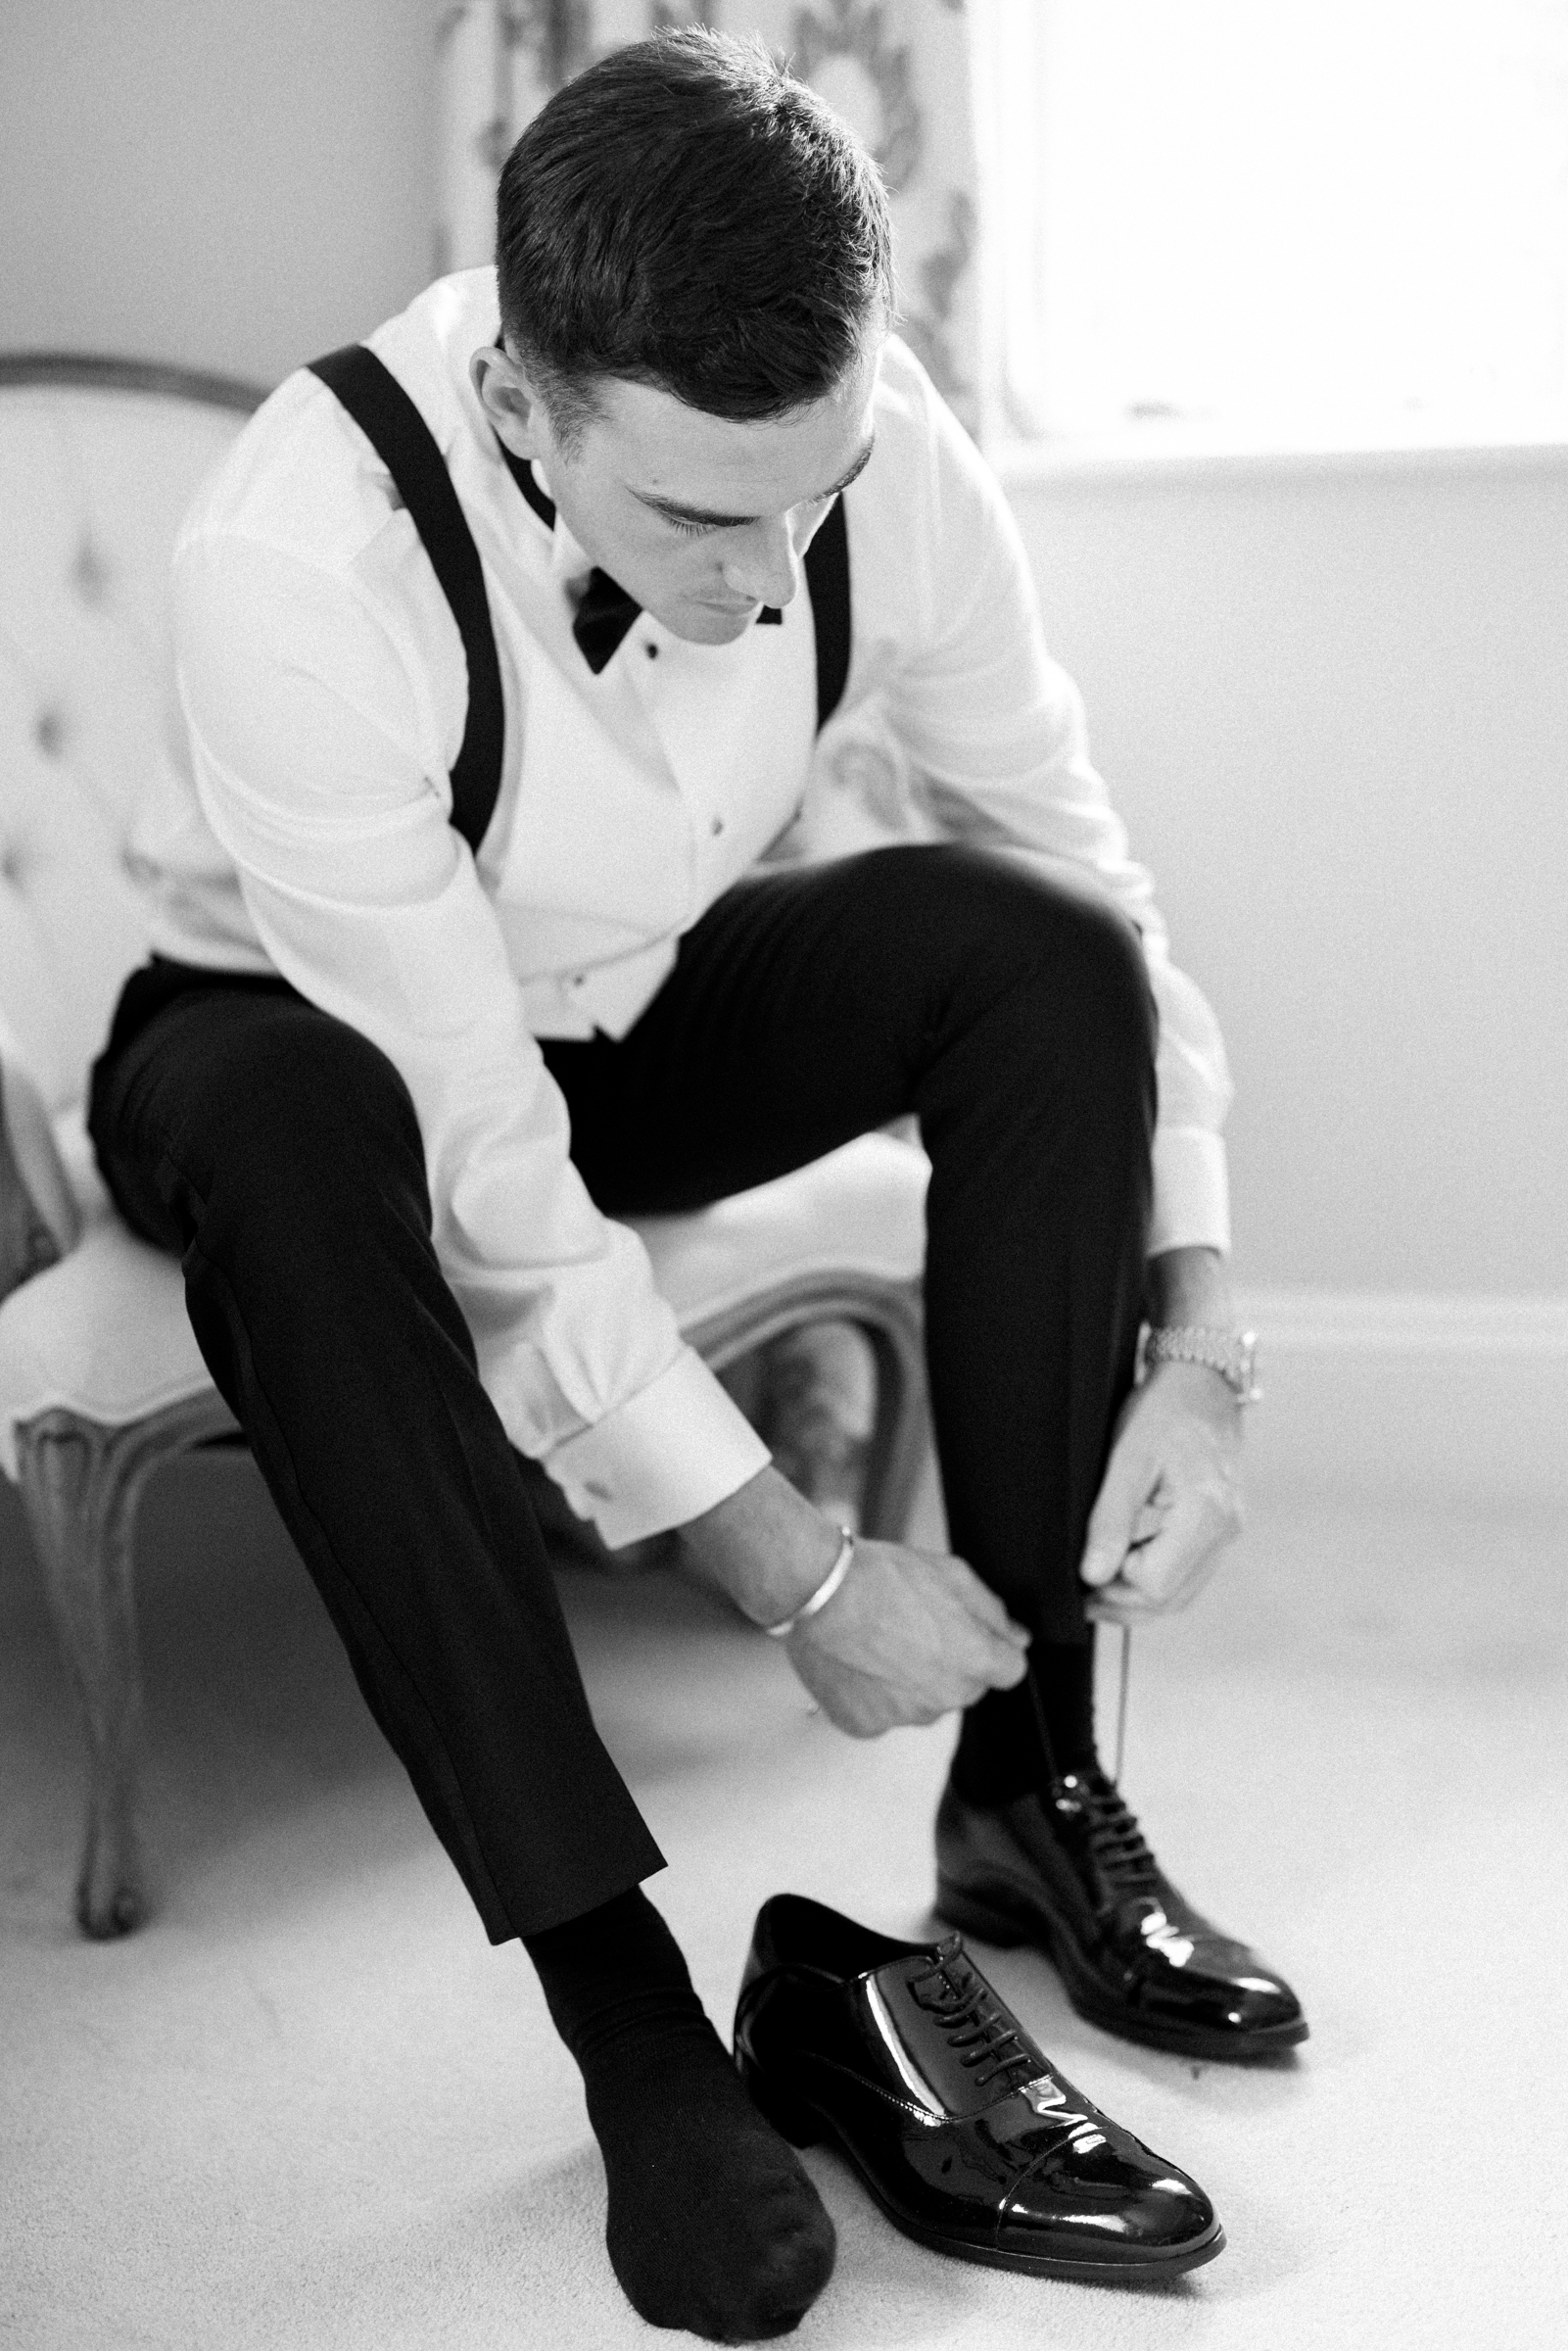 Groom getting ready for luxury wedding at Somerley House